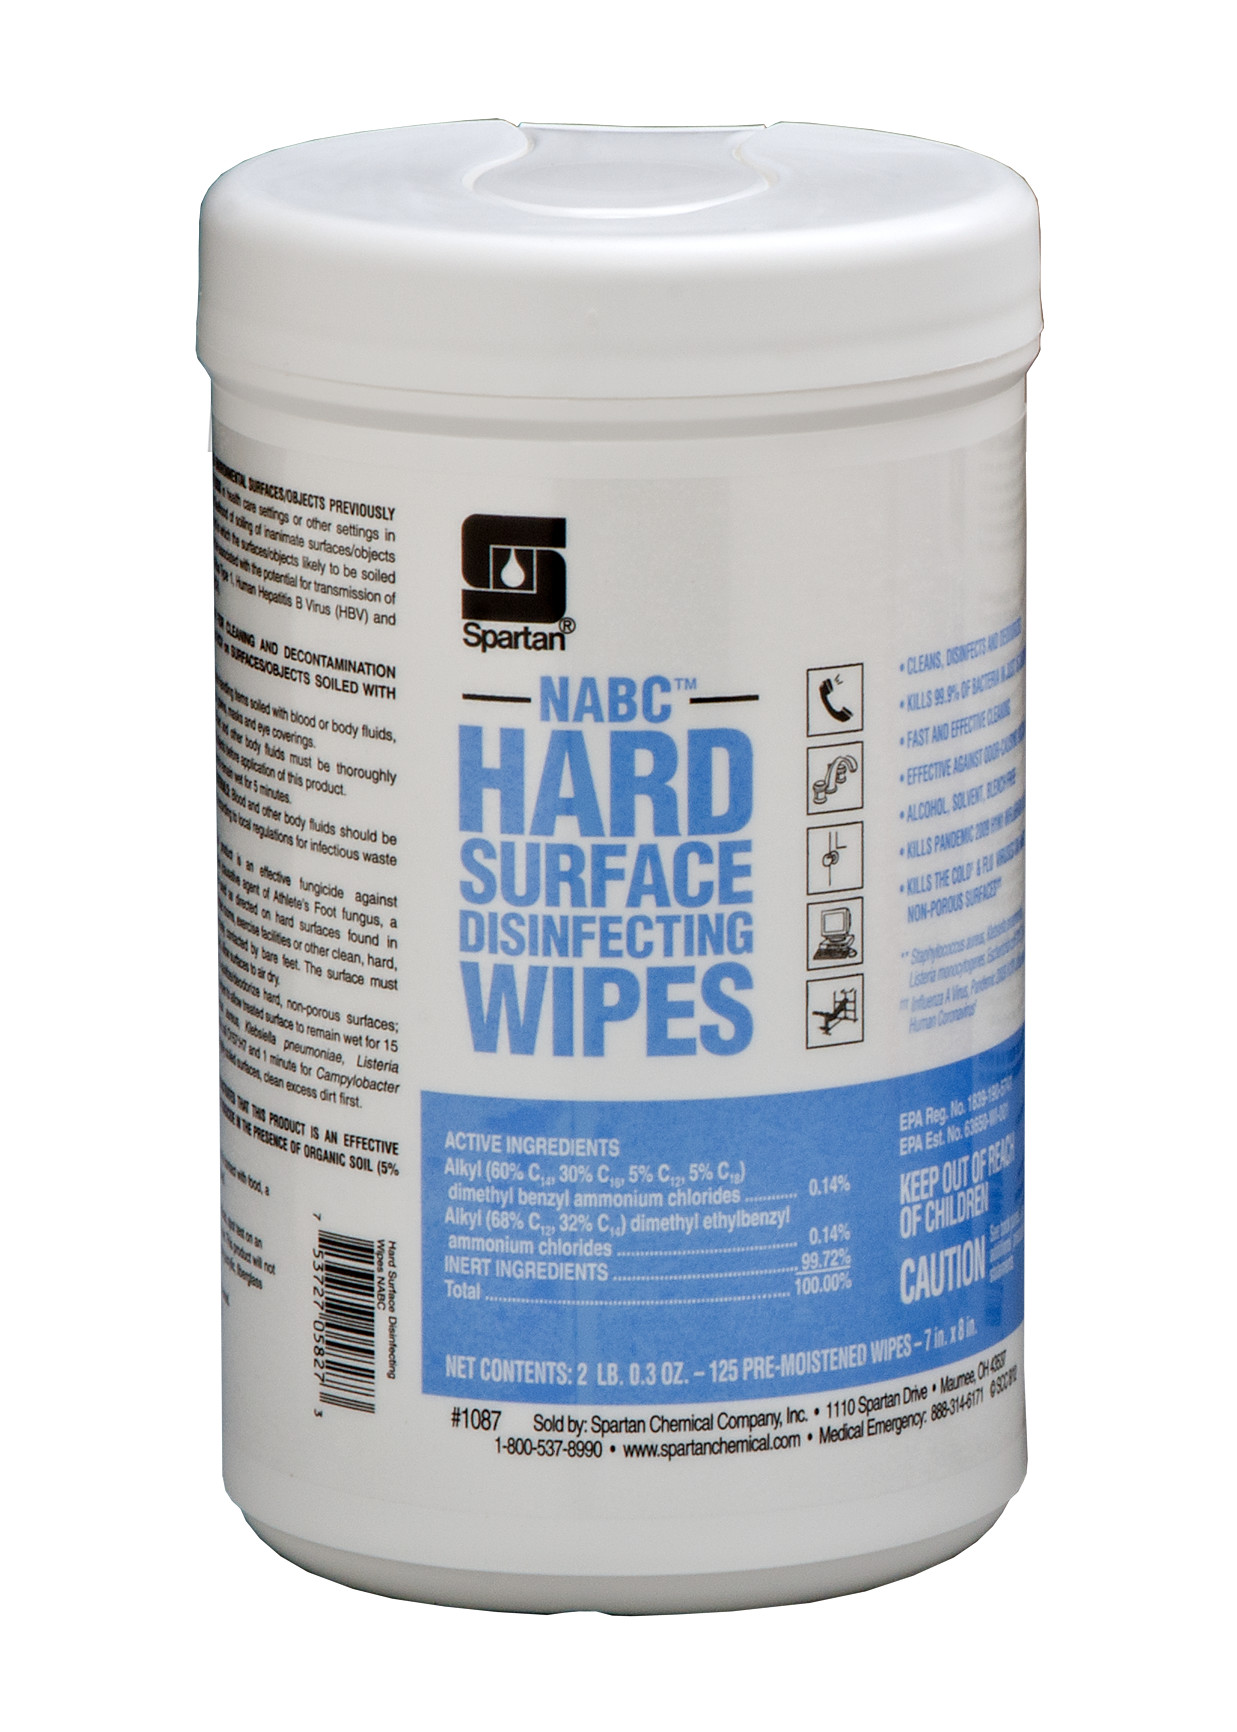 Spartan Chemical Company NABC Hard Surface Disinfecting Wipes, 125 Wipes 6/Case